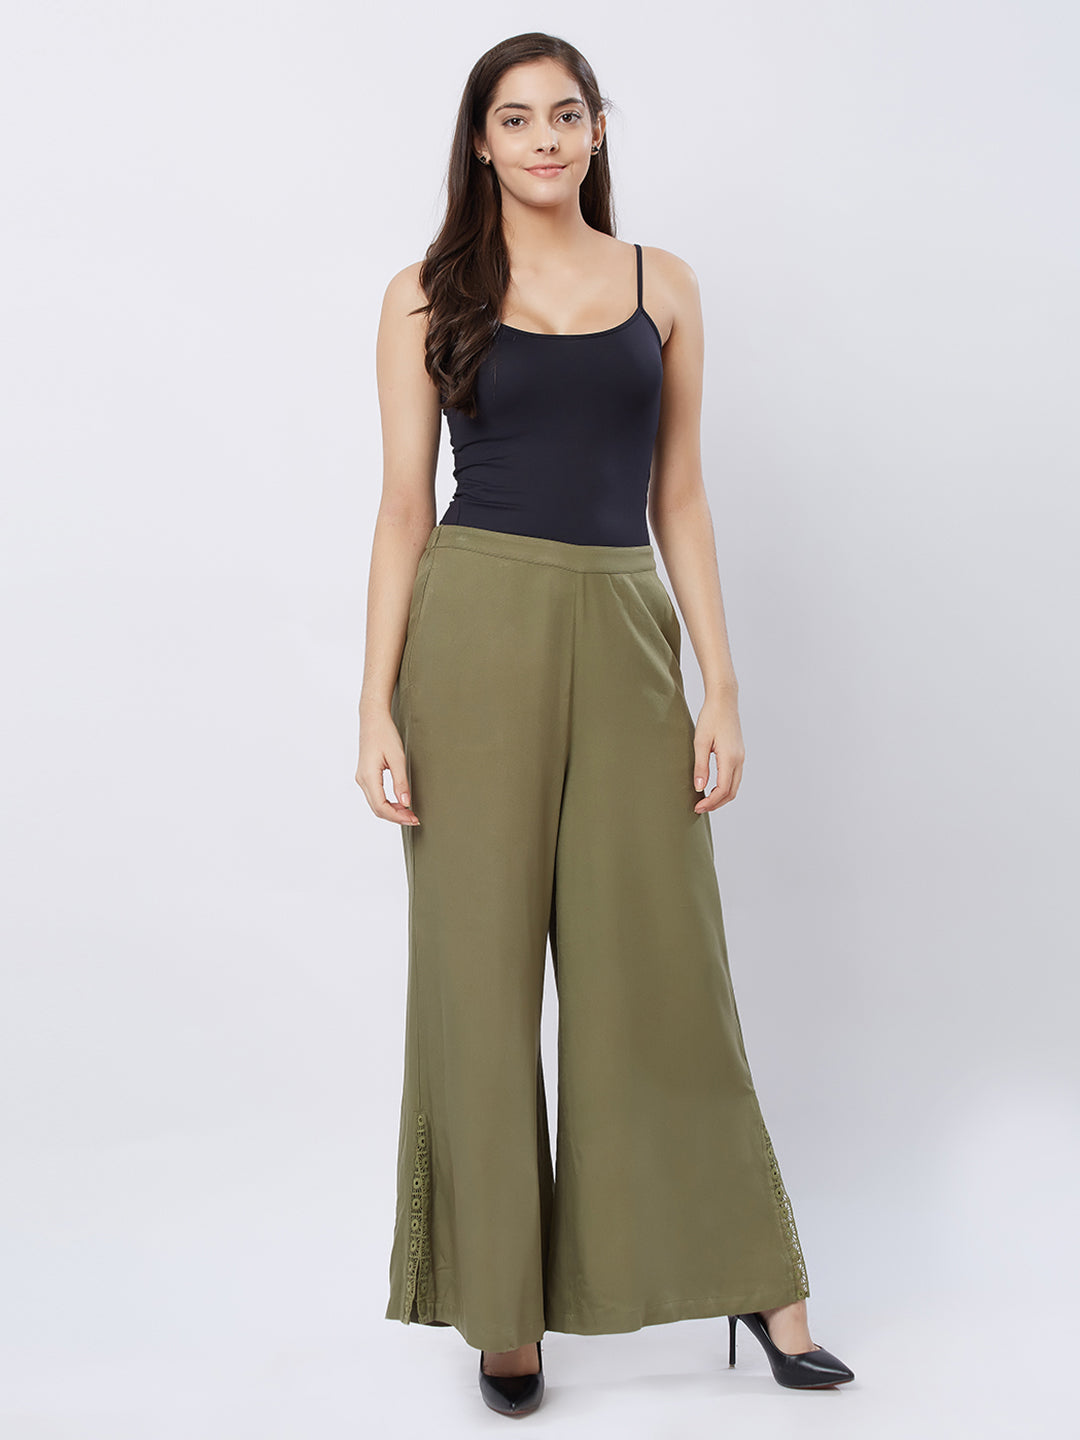 Alex Wide Leg Pant // Olive | Friday outfit for work, Casual friday work  outfits, Fashion